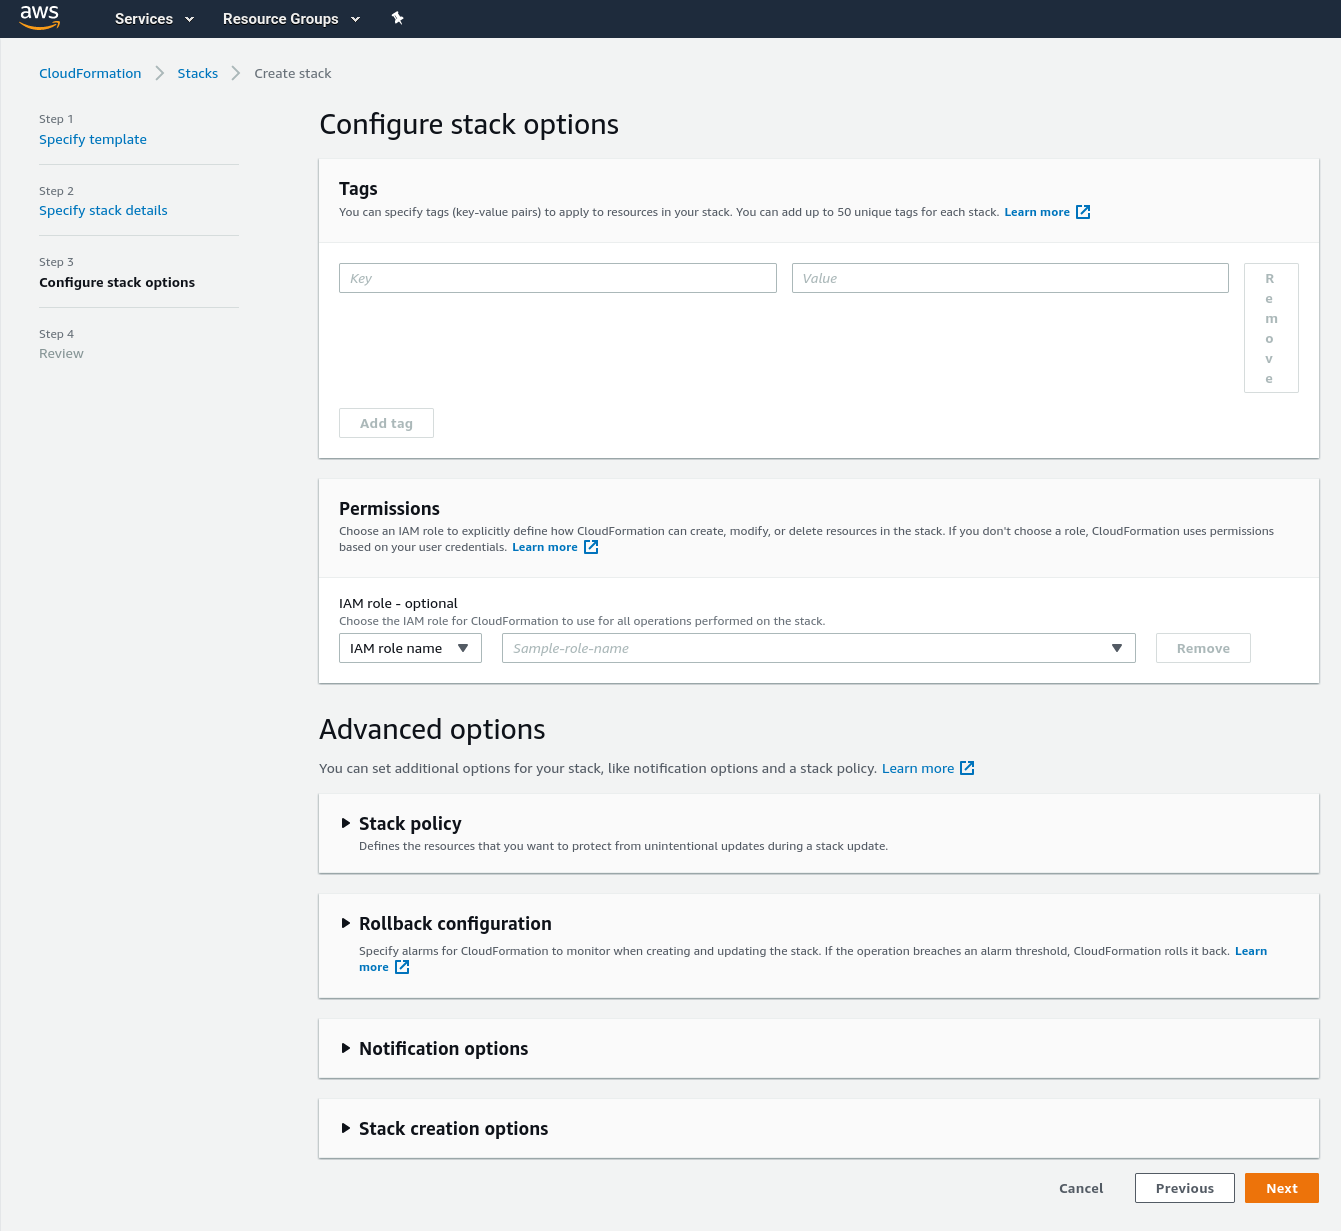 CloudFormation template to set up Fargate image scanning - The configure stack options step